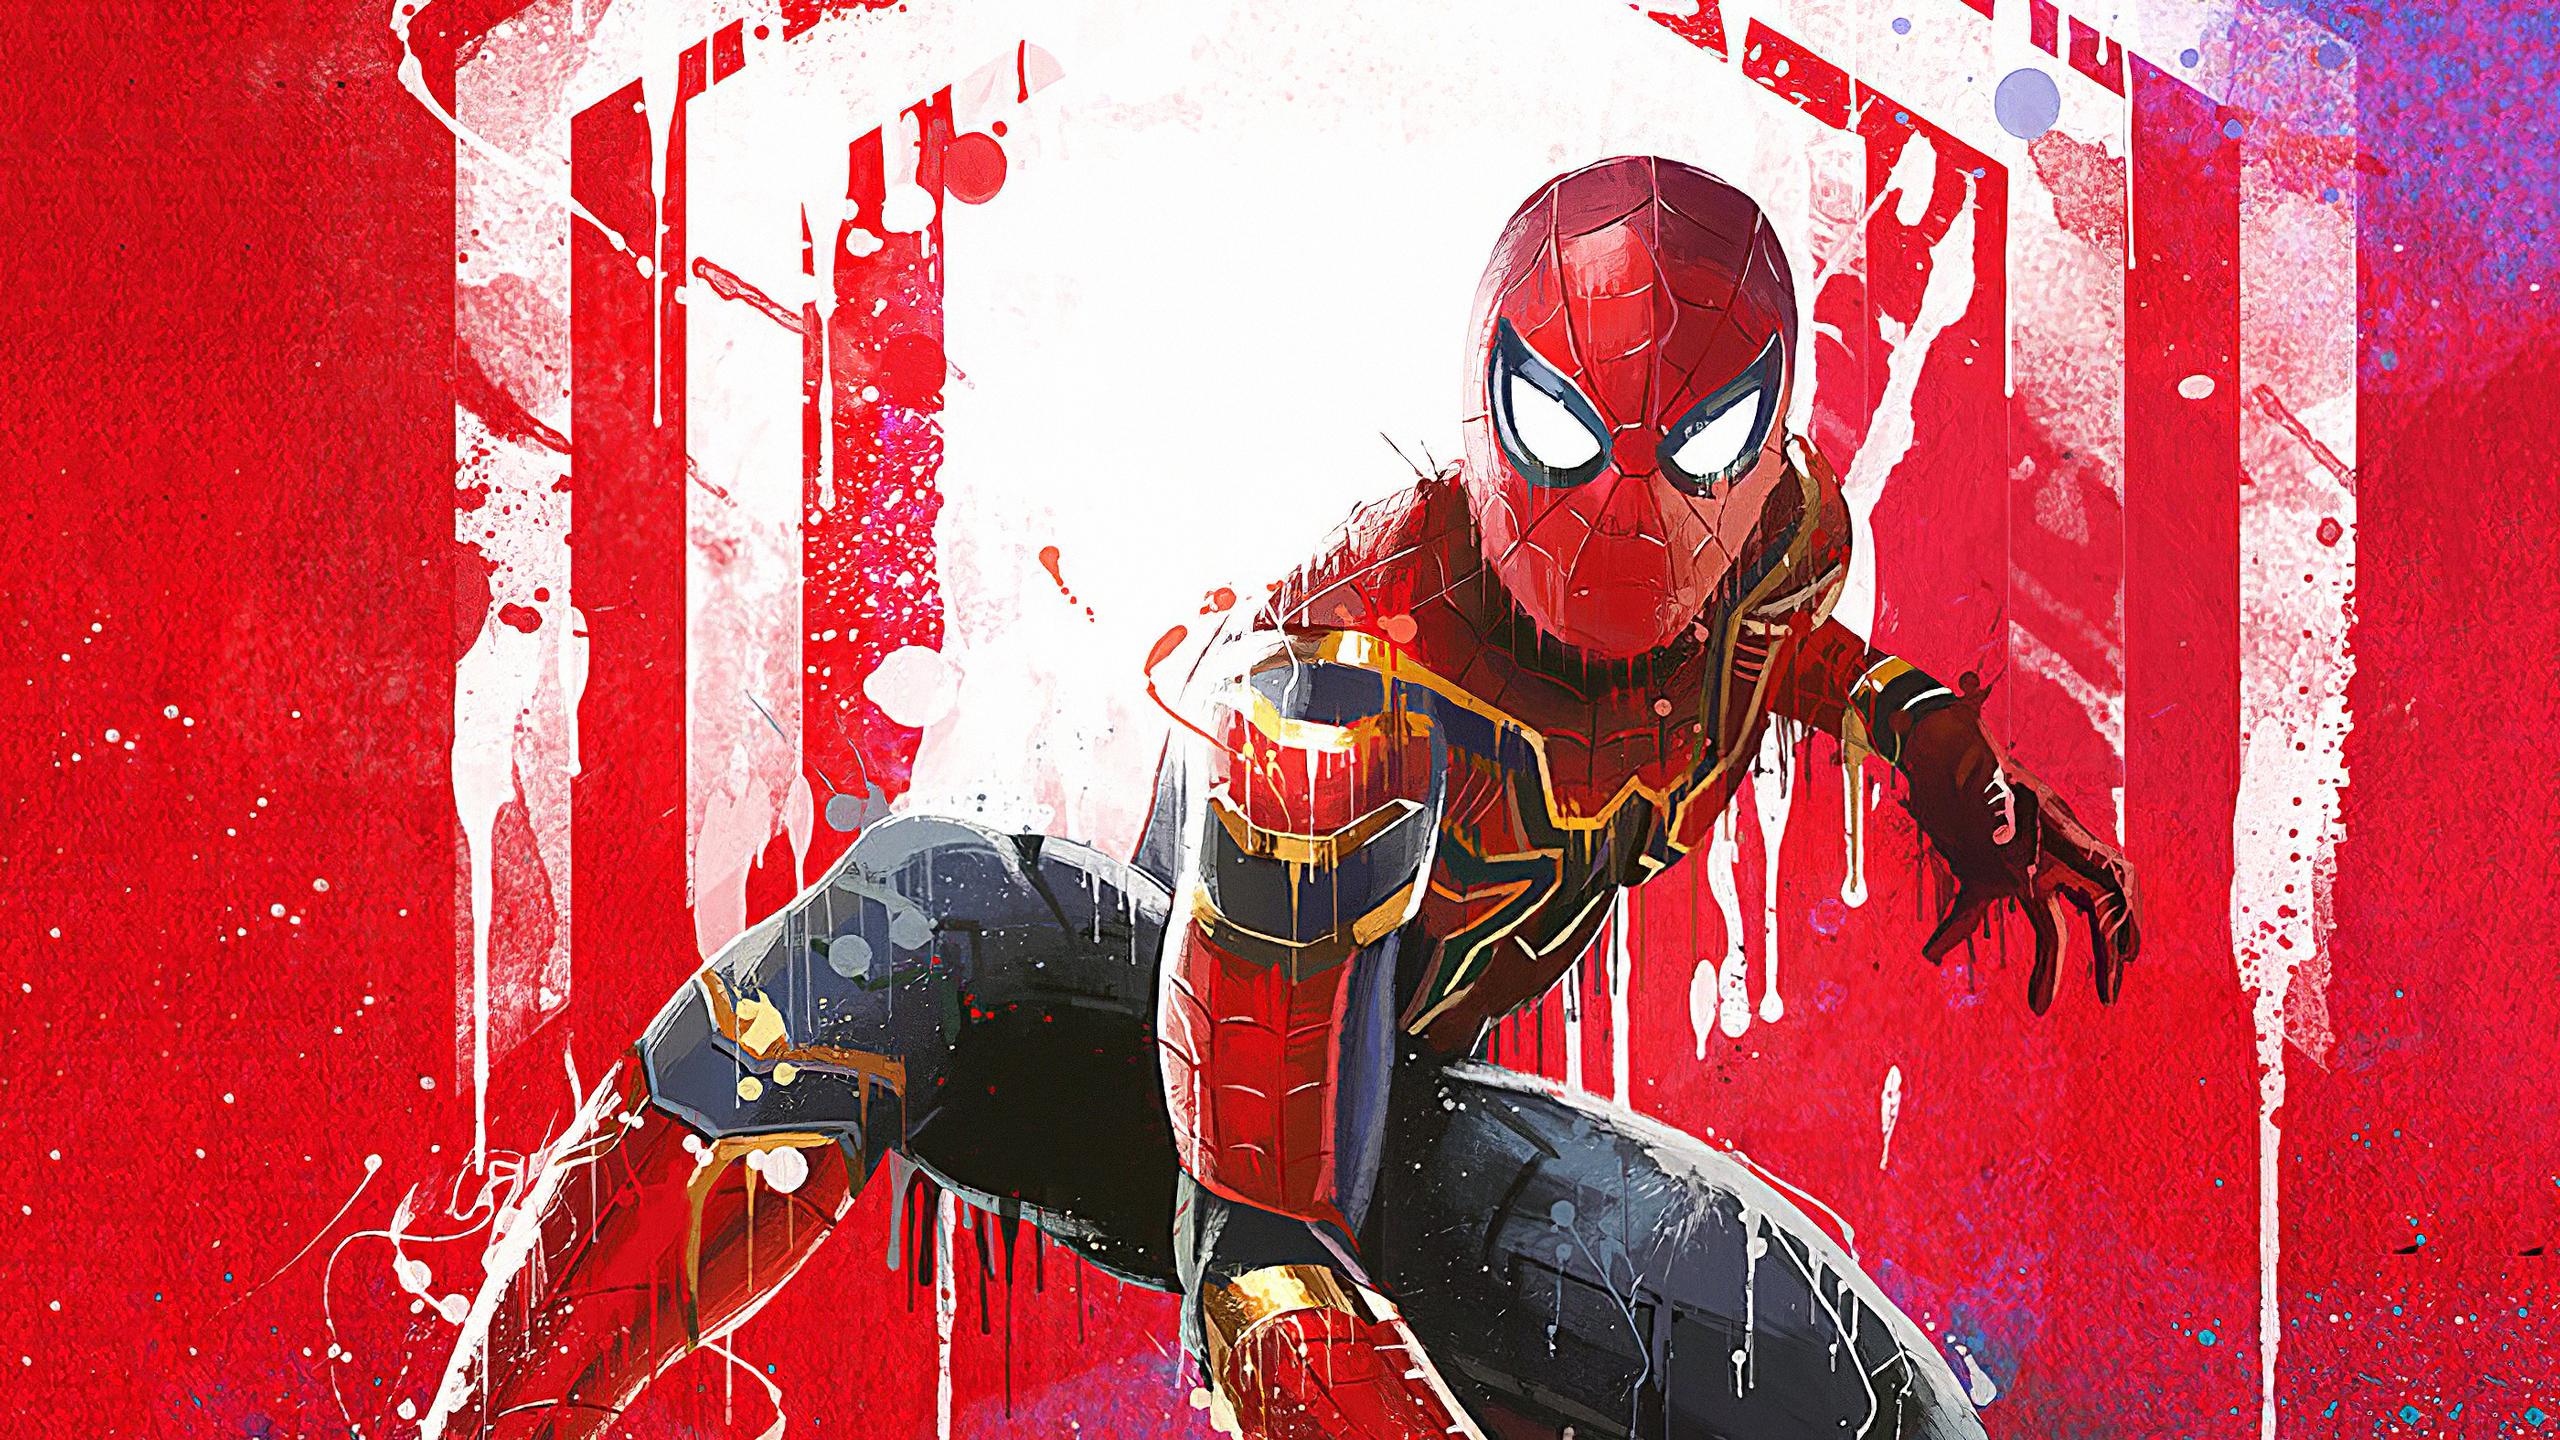 2560 x 1440 · jpeg - Spiderman Game Art, HD Superheroes, 4k Wallpapers, Images, Backgrounds ...